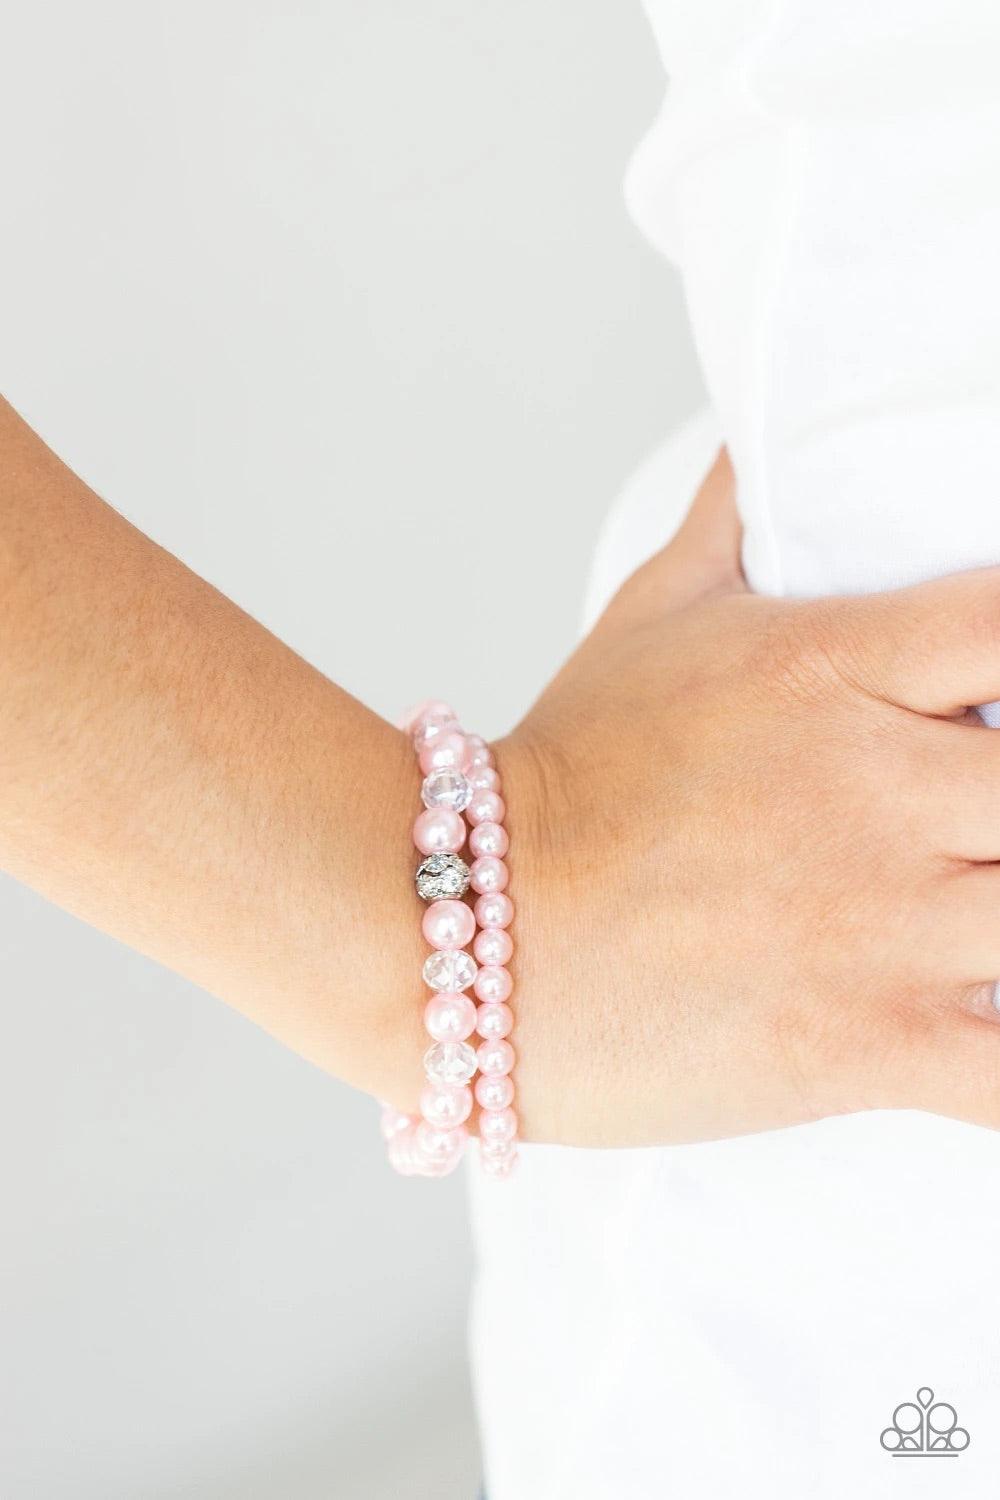 Paparazzi Accessories Cotton Candy Dreams - Pink A collection of dainty pink pearls and glassy crystal-like beads are threaded along two stretchy bands around the wrist, creating timeless layers. A white rhinestone encrusted silver bead adorns the center